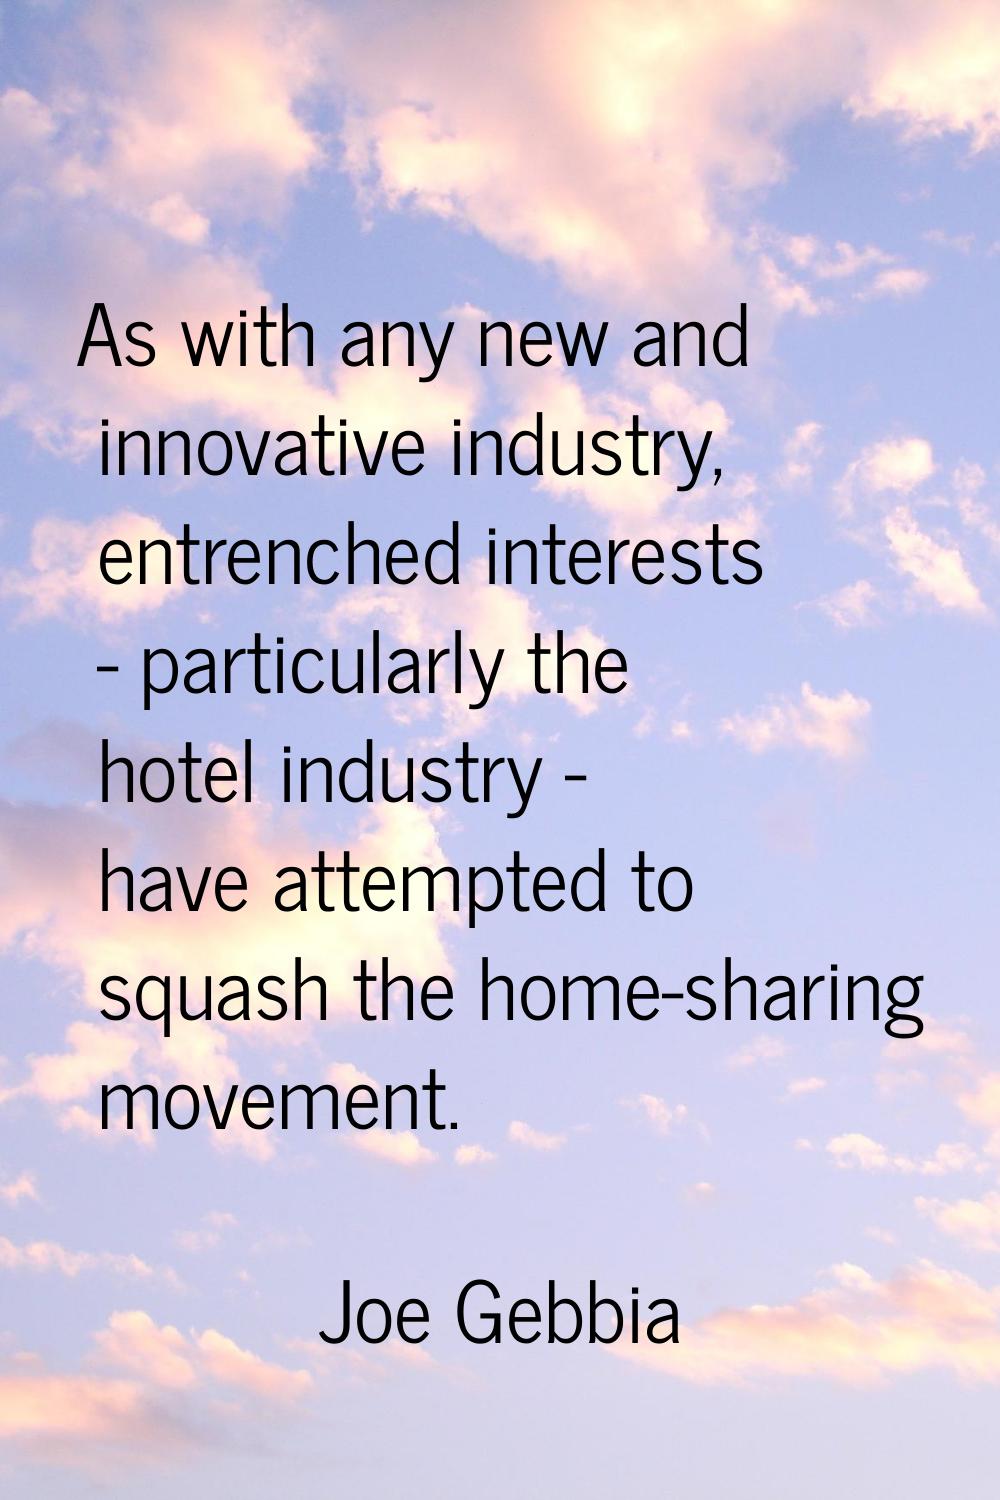 As with any new and innovative industry, entrenched interests - particularly the hotel industry - h